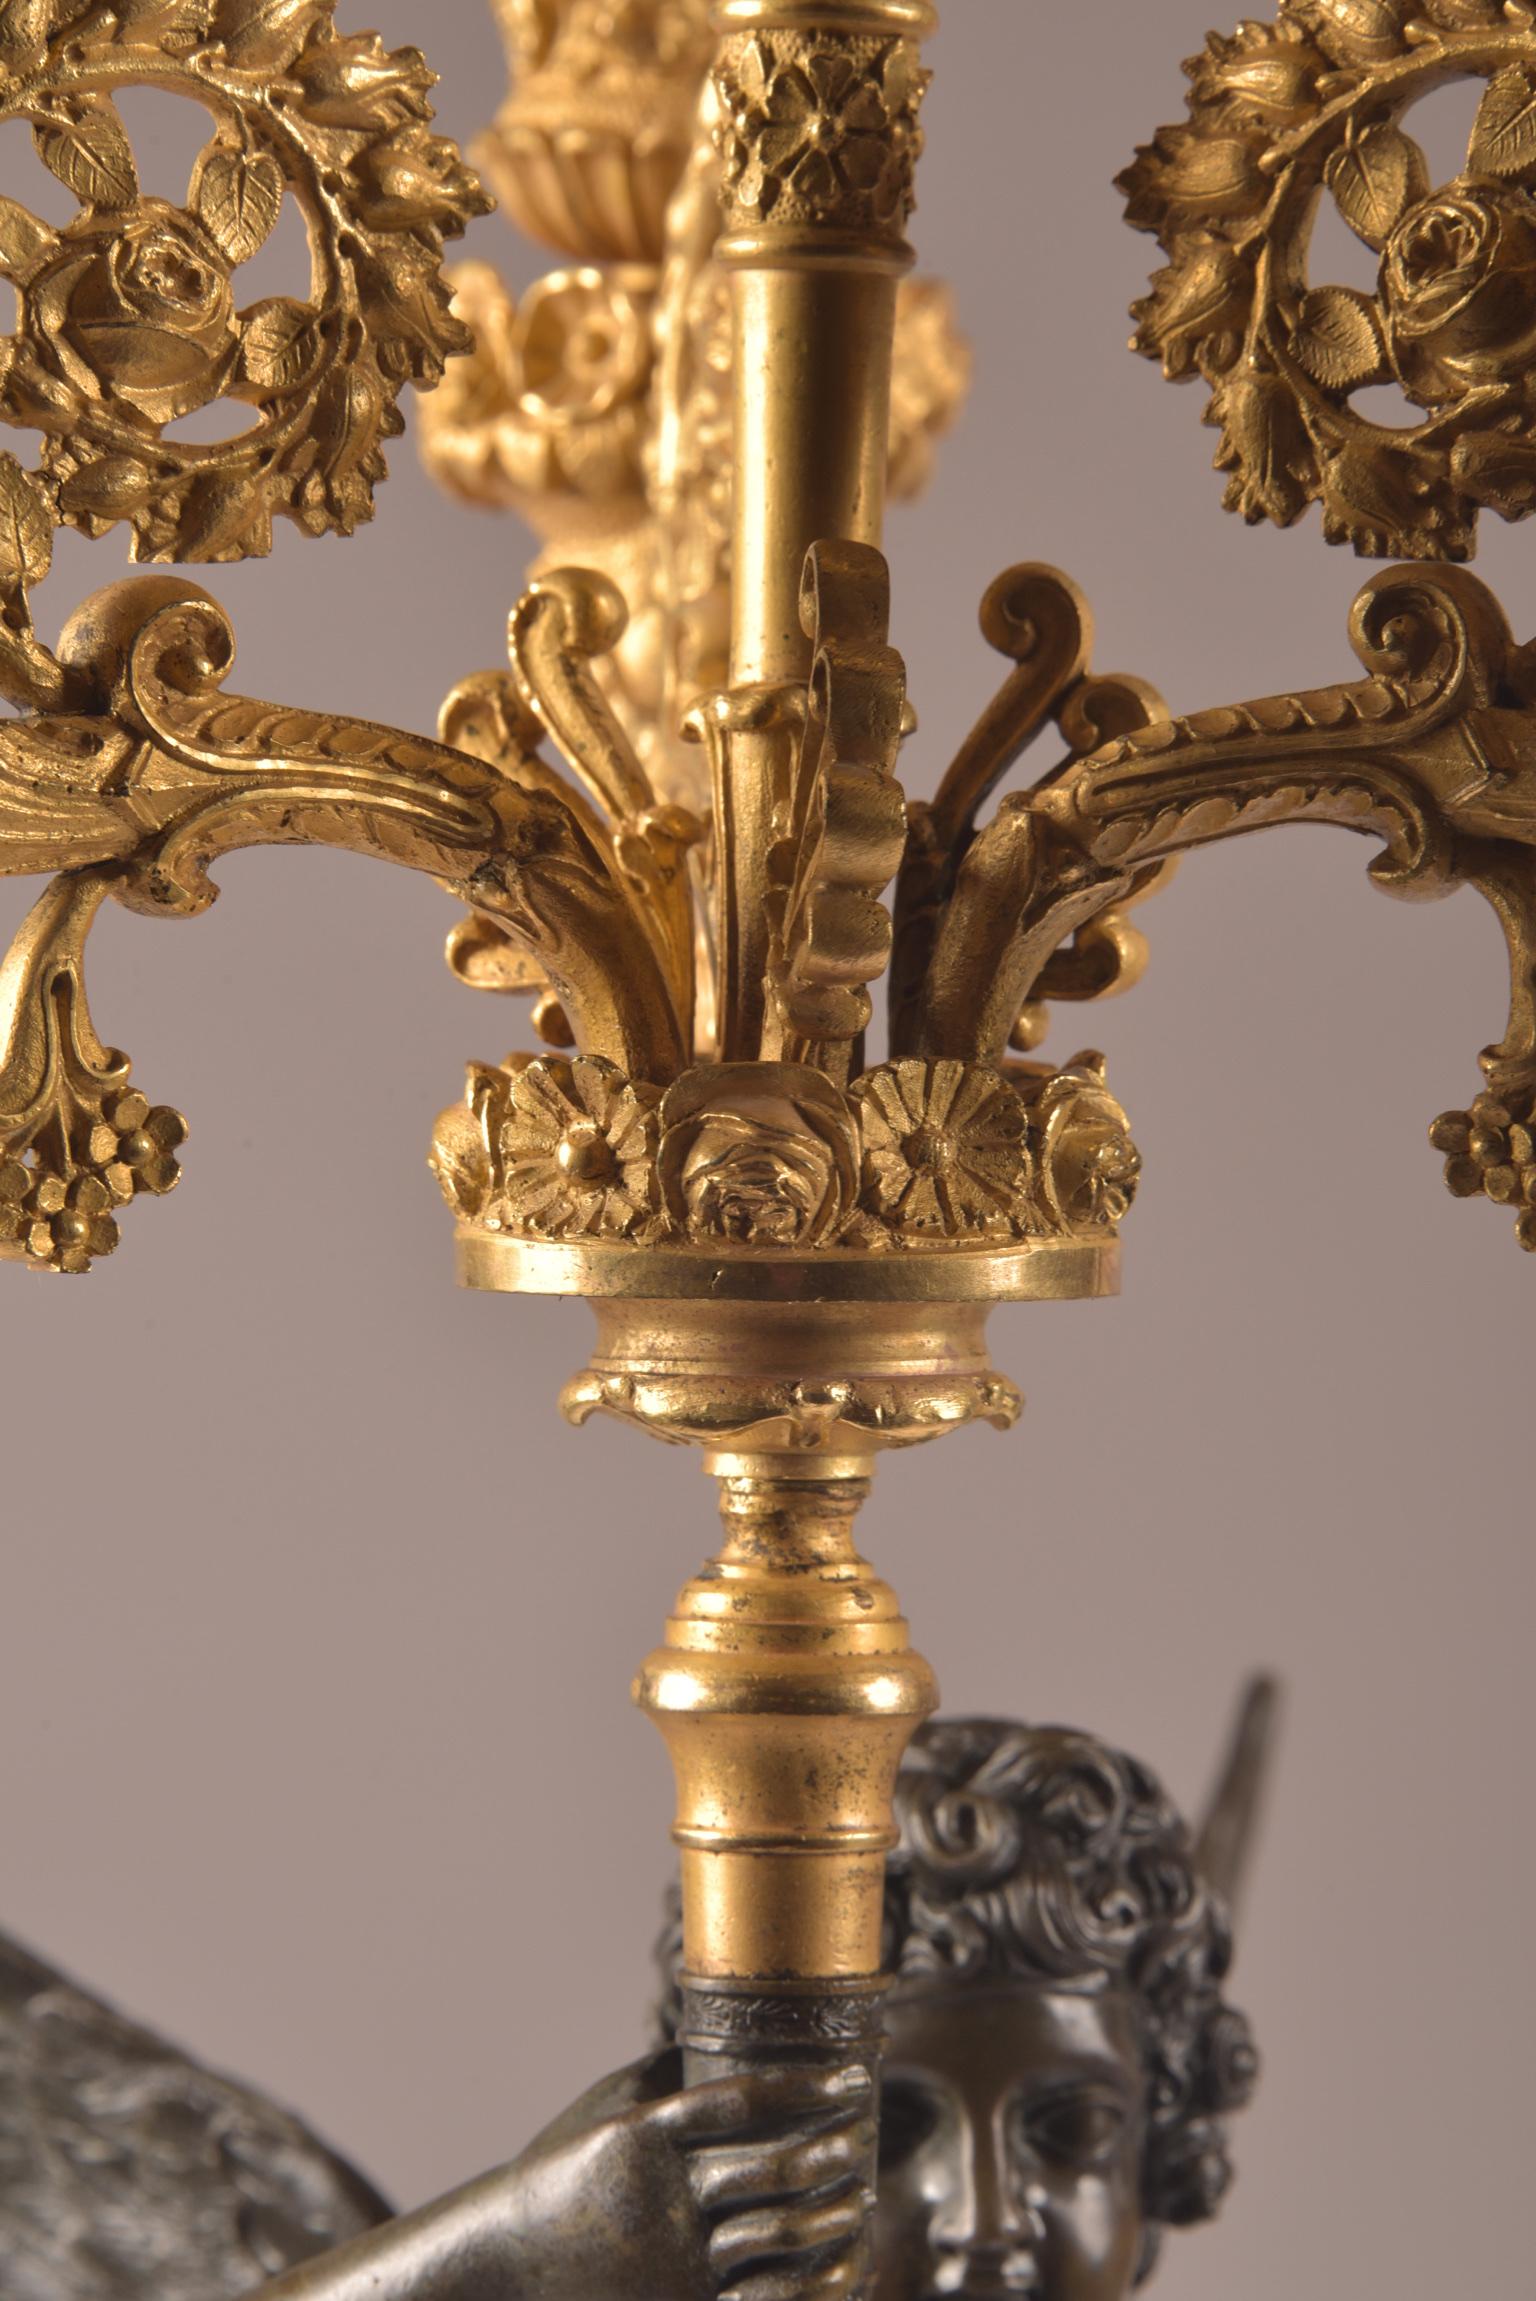 Pair of French Empire Candelabras with Putti, Superb Ormolu Candleholders, 1810  im Angebot 12